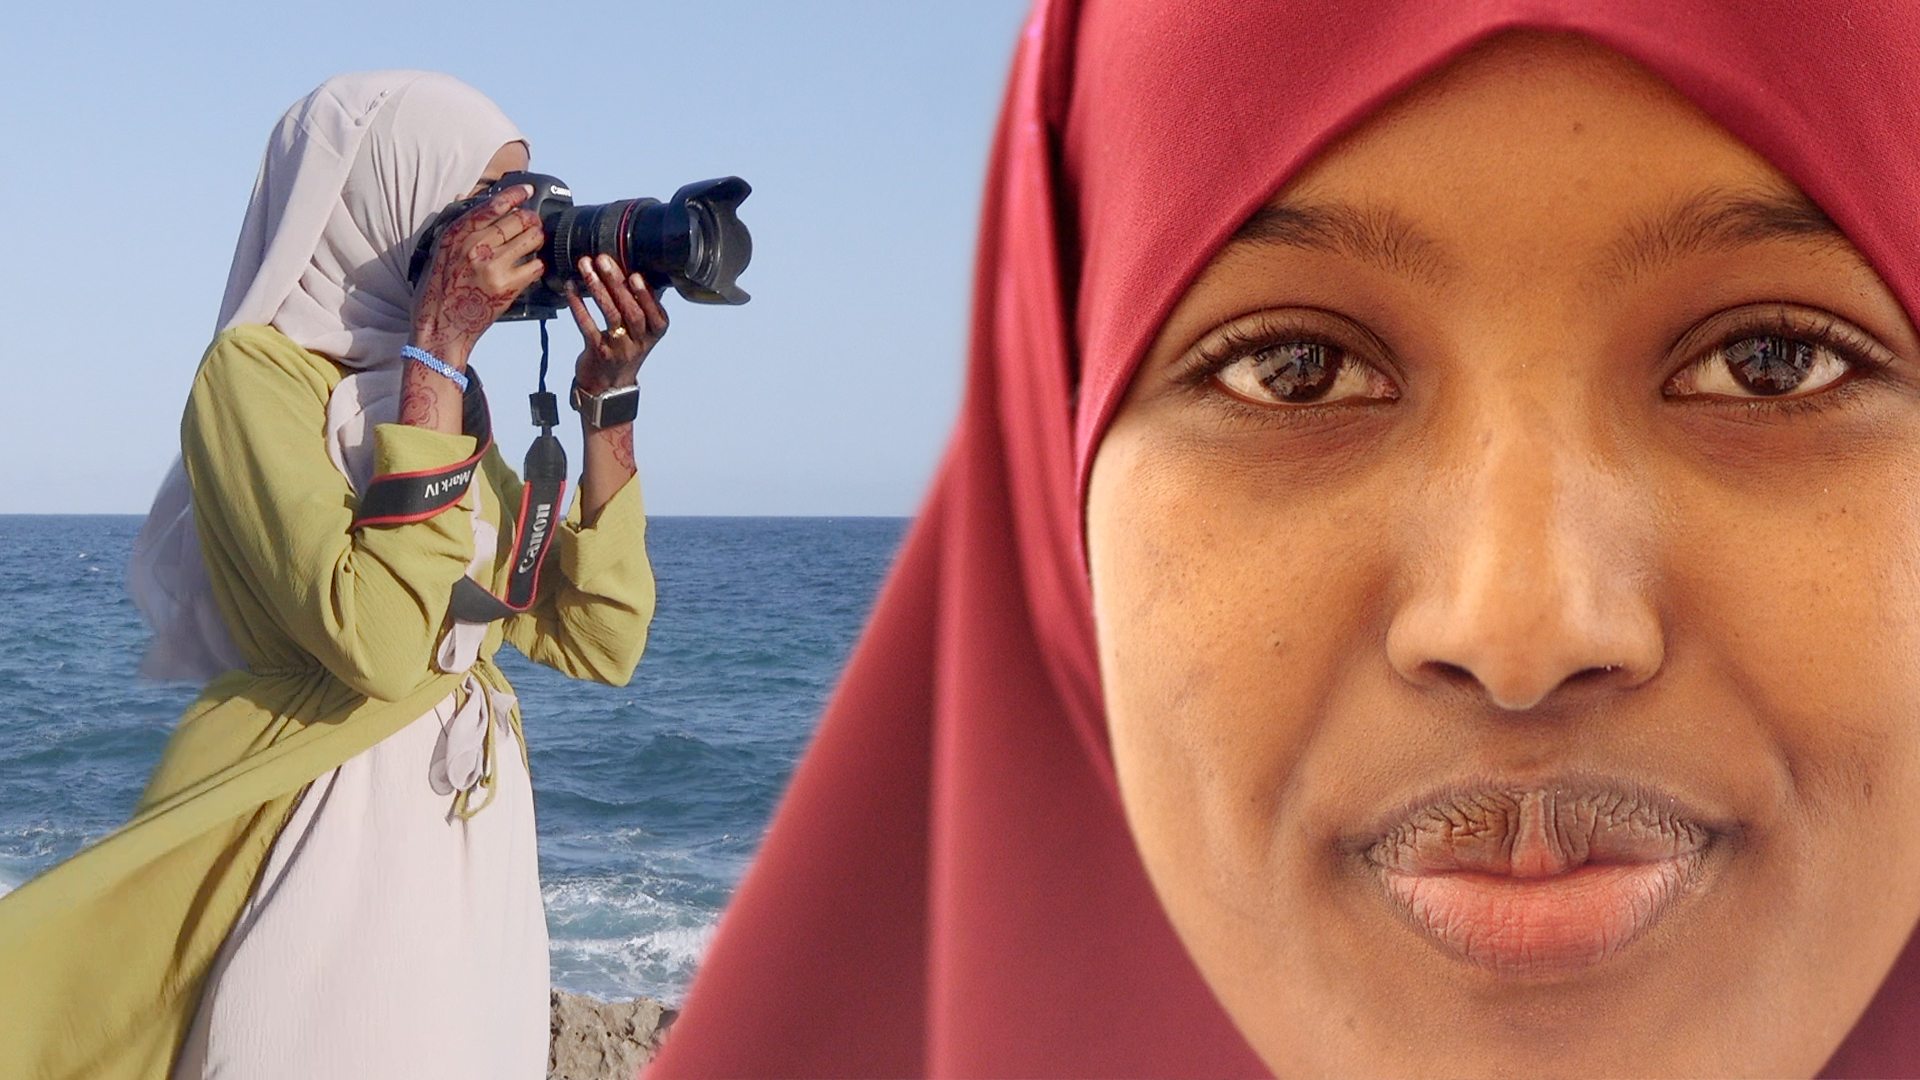 Somalia, sexism and me: Being a camerawoman in Mogadishu - BBC News